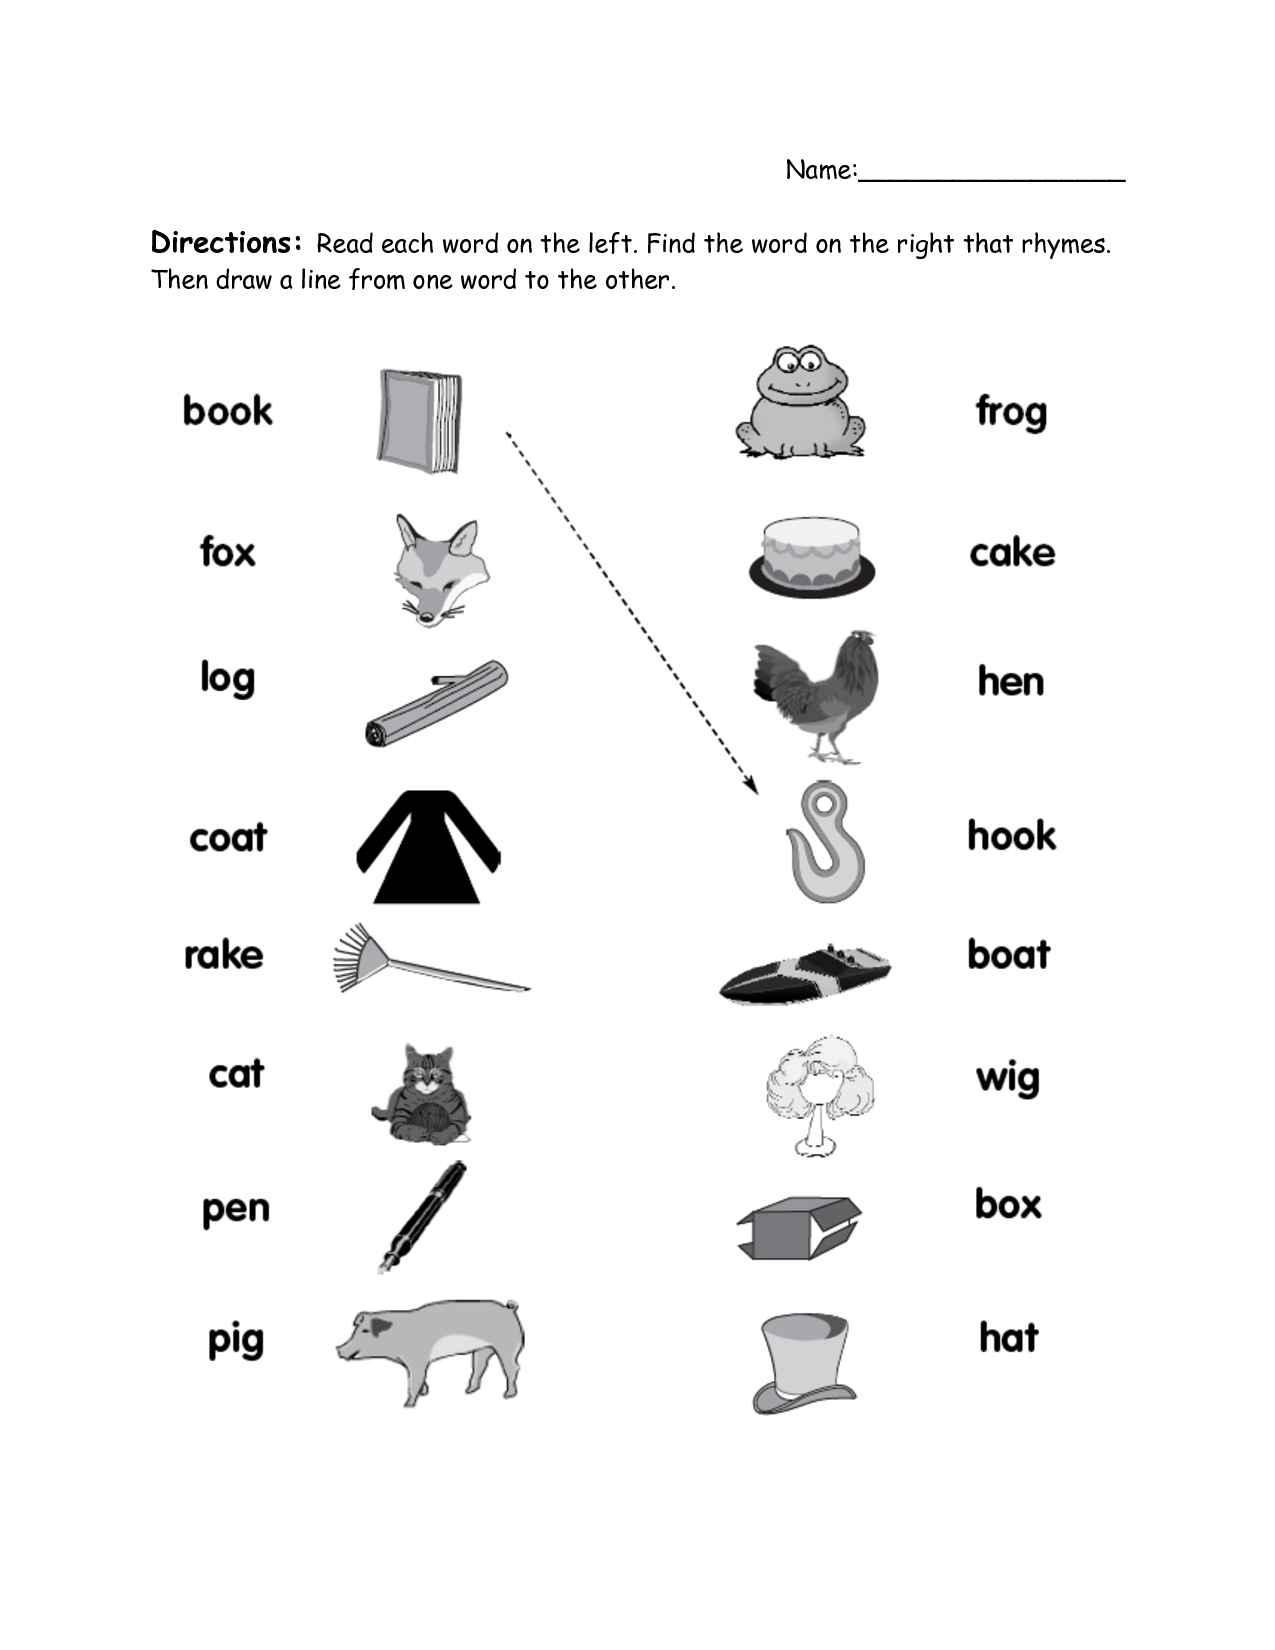 Free Printable Rhyming Words Worksheets For First Grade